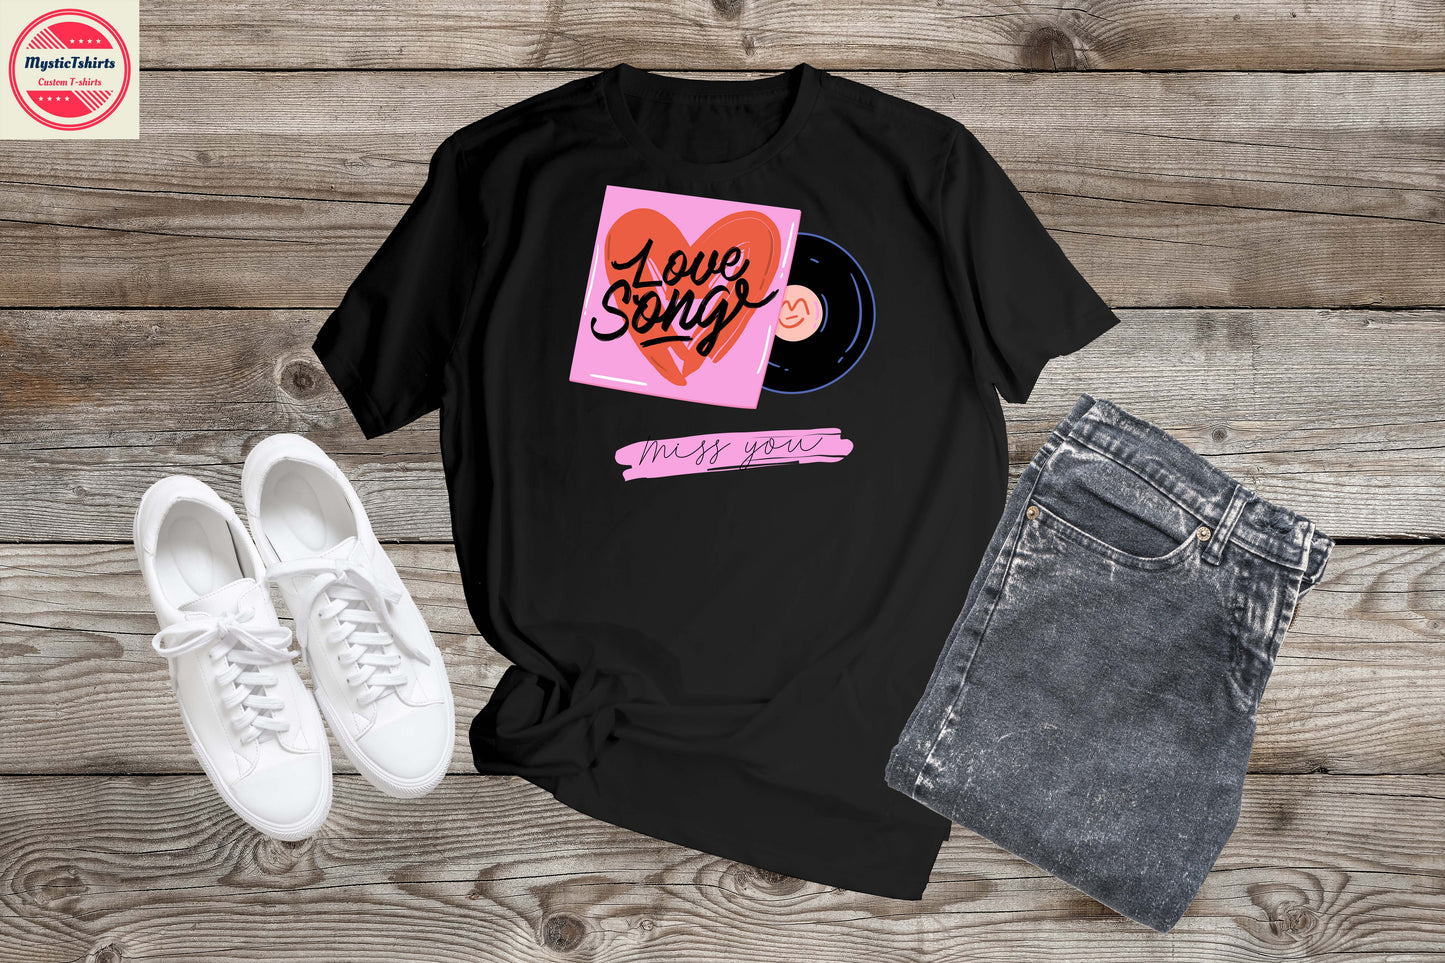 294. LOVE/VALENTINE LOVE SONG MISS YOU, Custom Made Shirt, Personalized T-Shirt, Custom Text, Make Your Own Shirt, Custom Tee